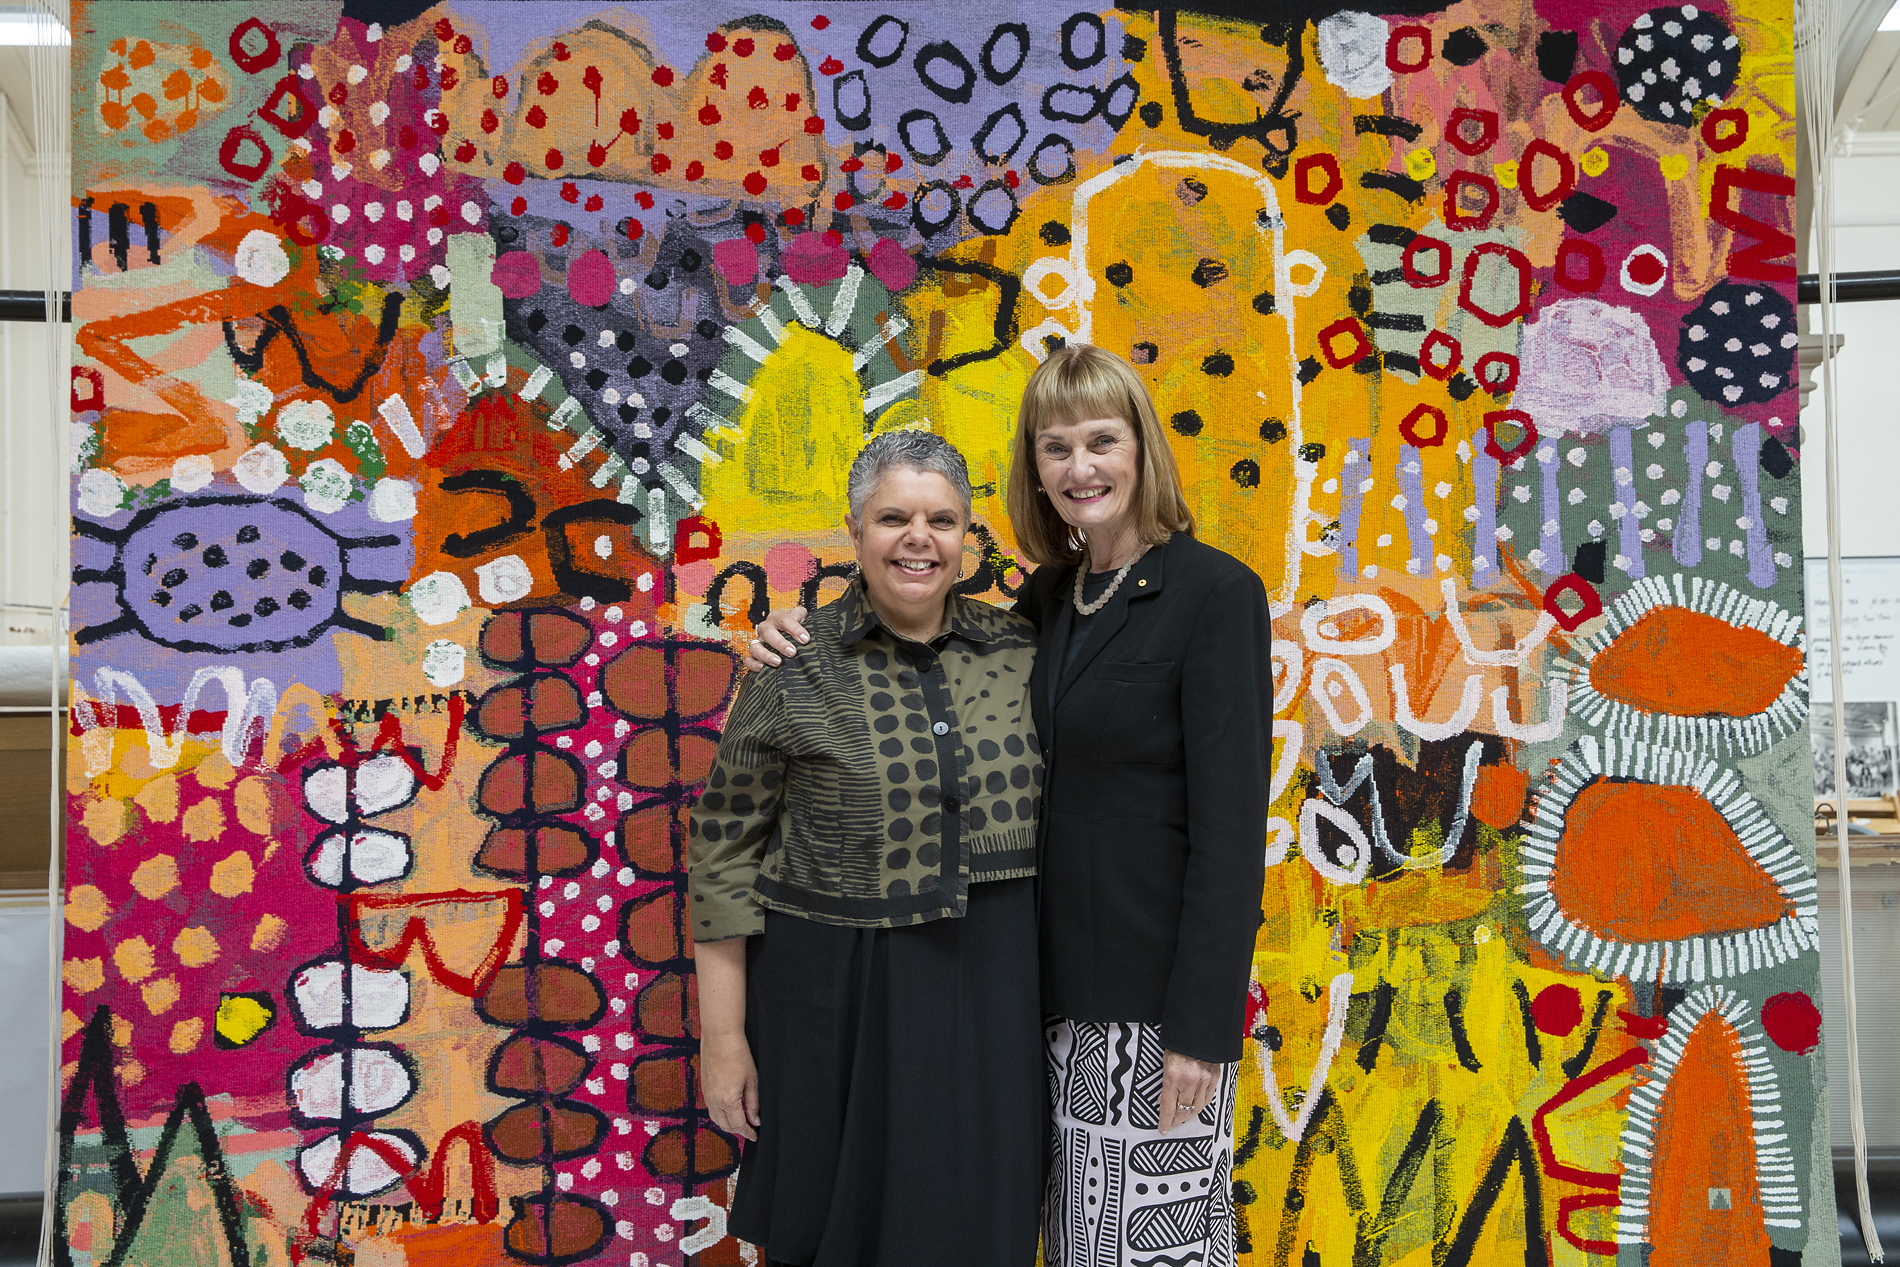 ATW Director Antonia Syme AM and Deborah Cheetham AOwith ‘The Royal Harvest’, 2021, Naomi Hobson, currently on loan to the Australian Embassy to Indonesia, Jakarta.Photo: John Gollings AM.